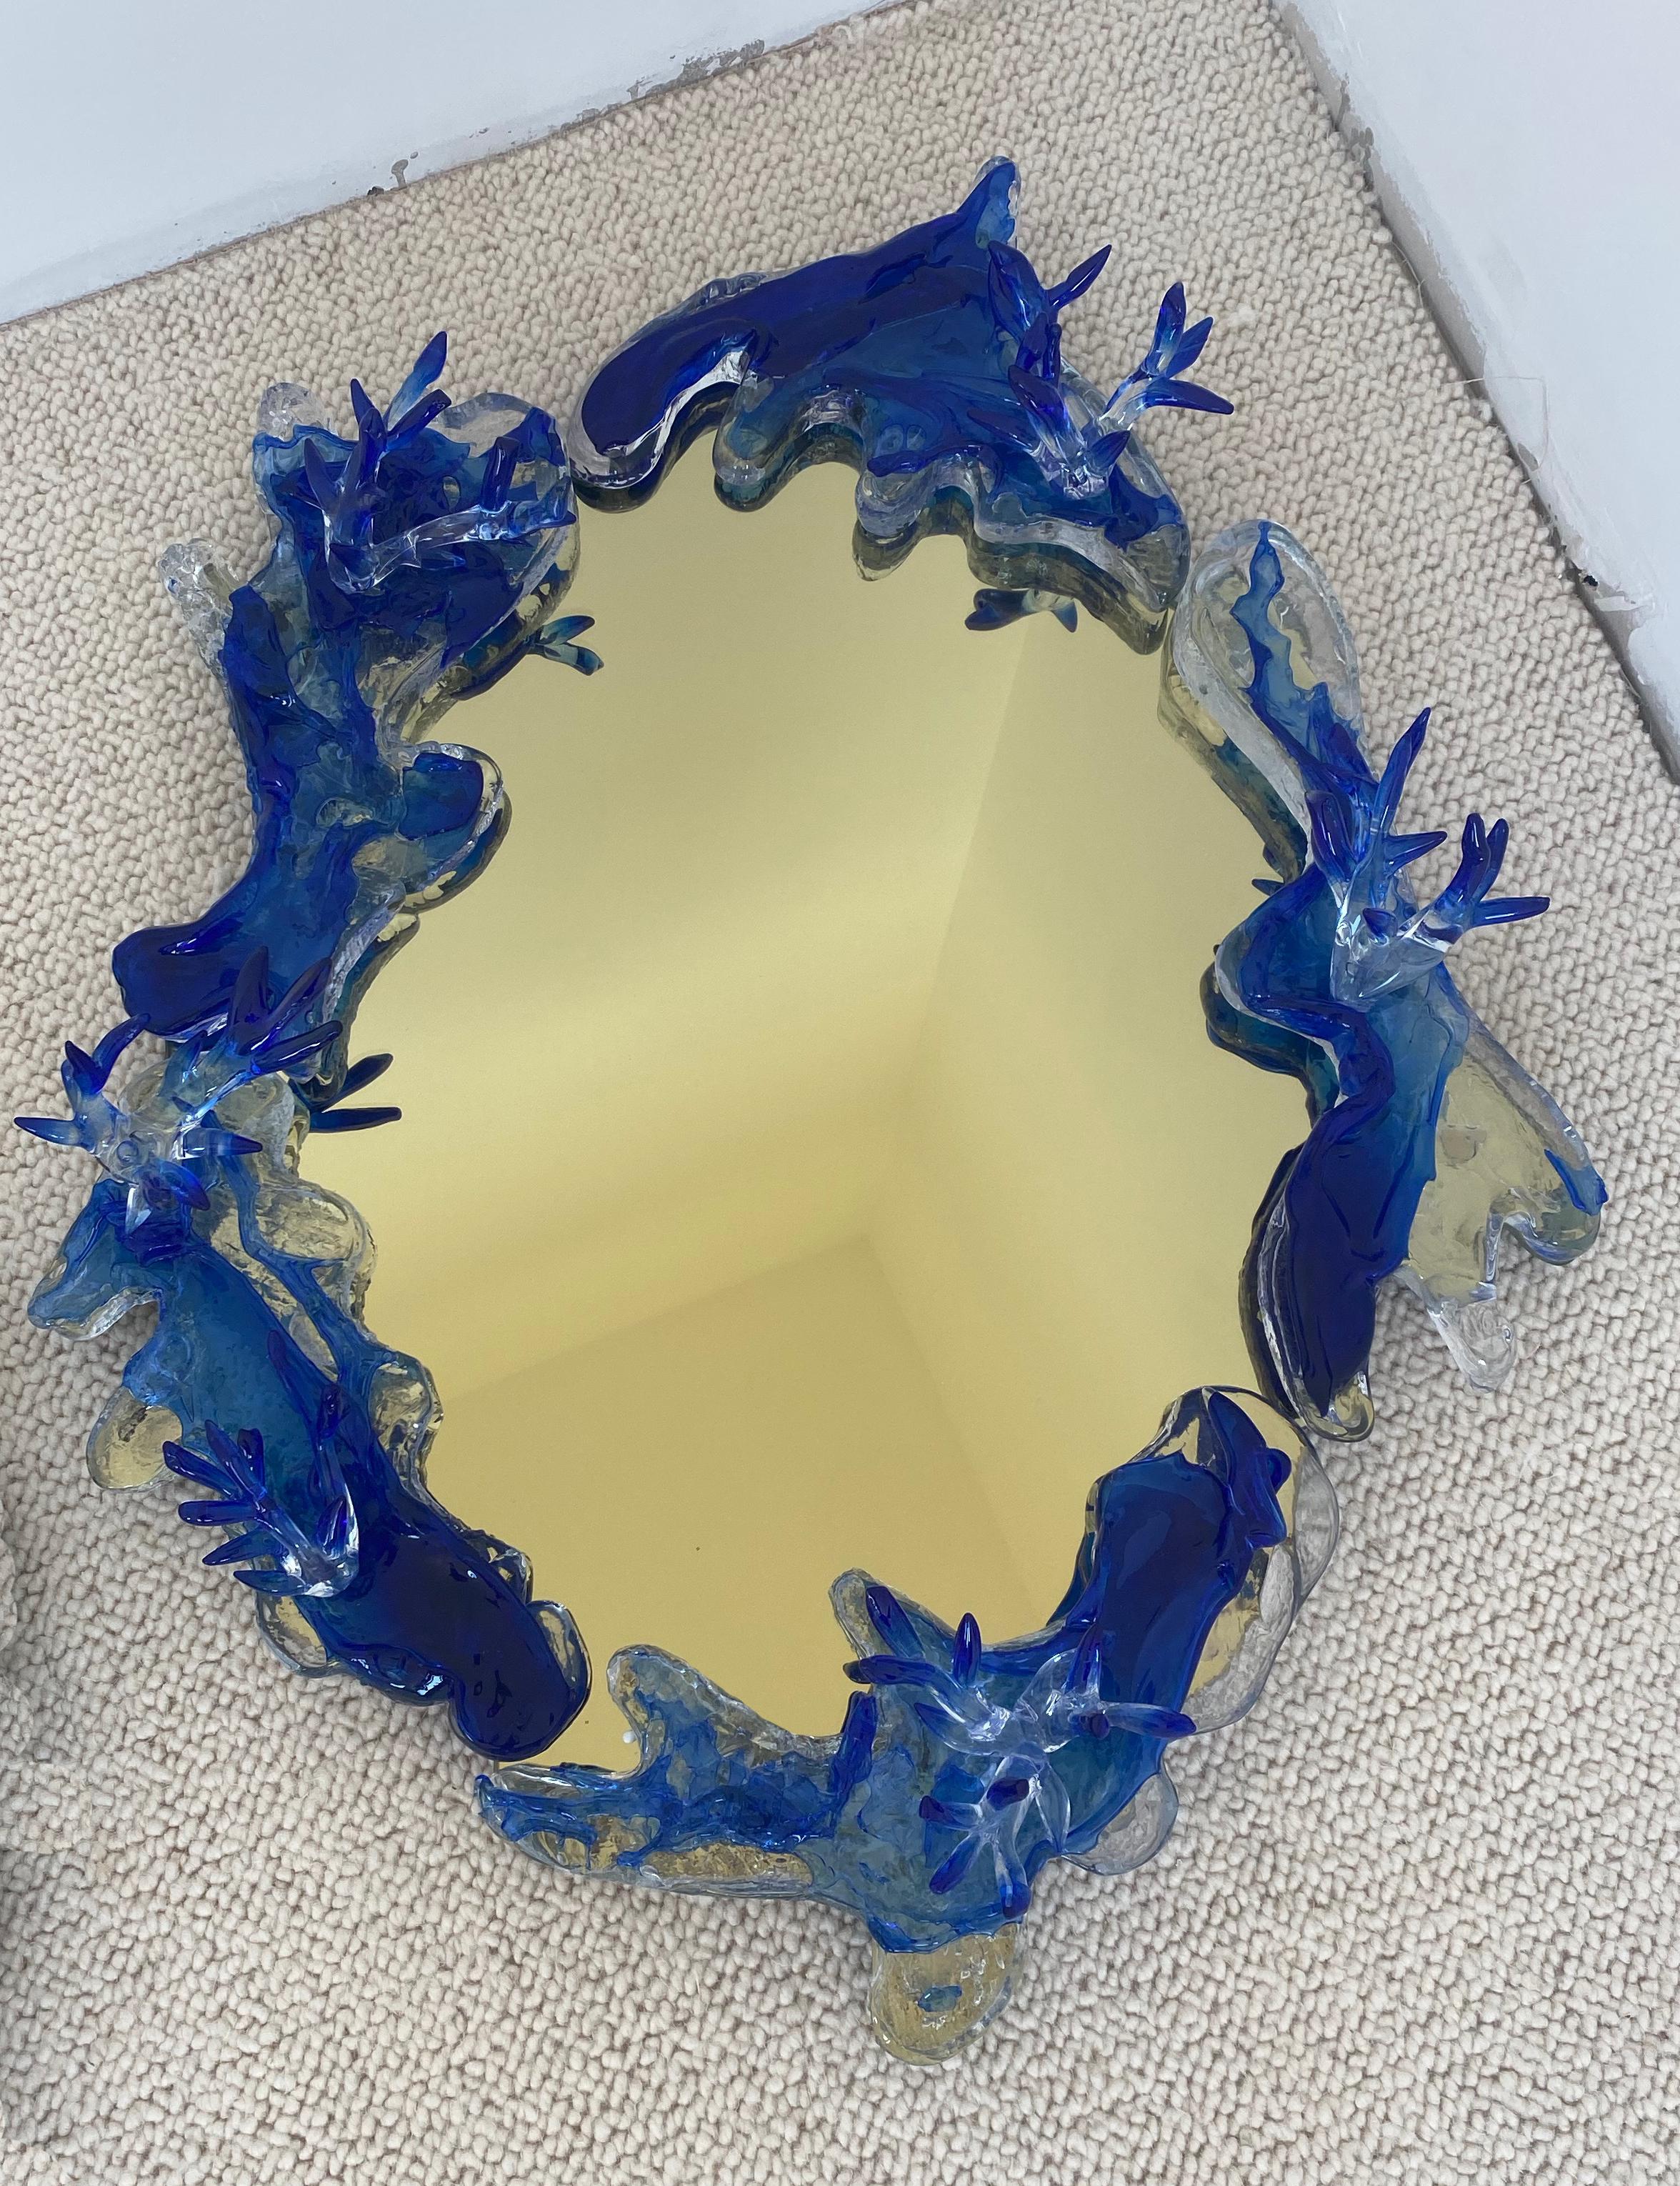 Light Gold Mirror With Ultramarine Blue Decor by Emilie Lemardeley
Dimensions: D 17 x W 57 x H 70 cm.
Materials: Glass and mirror.

Designed as jewellery for the interior, the Lemardeley’s creations reflect French craftsmanship infused with elegance